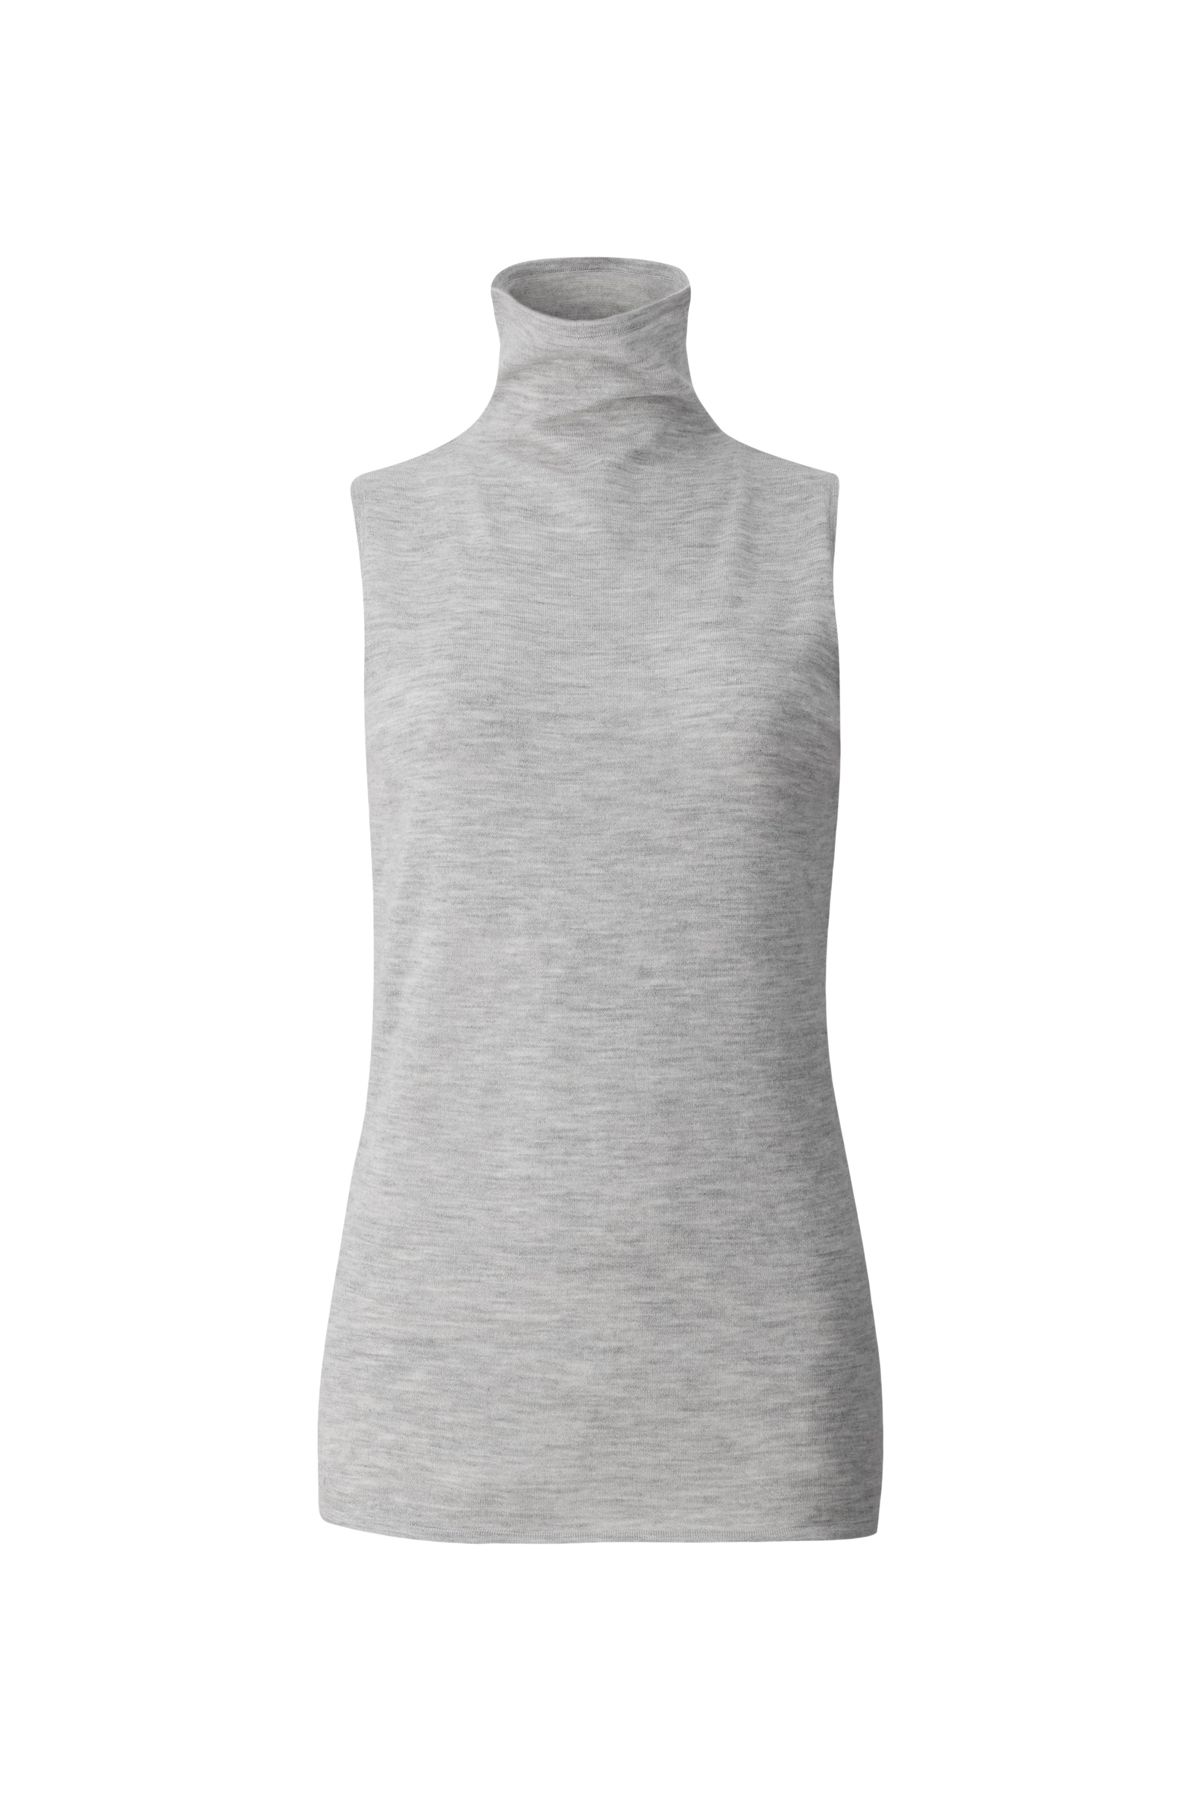 The Palermo grey pure cashmere rollneck sleeveless sweater